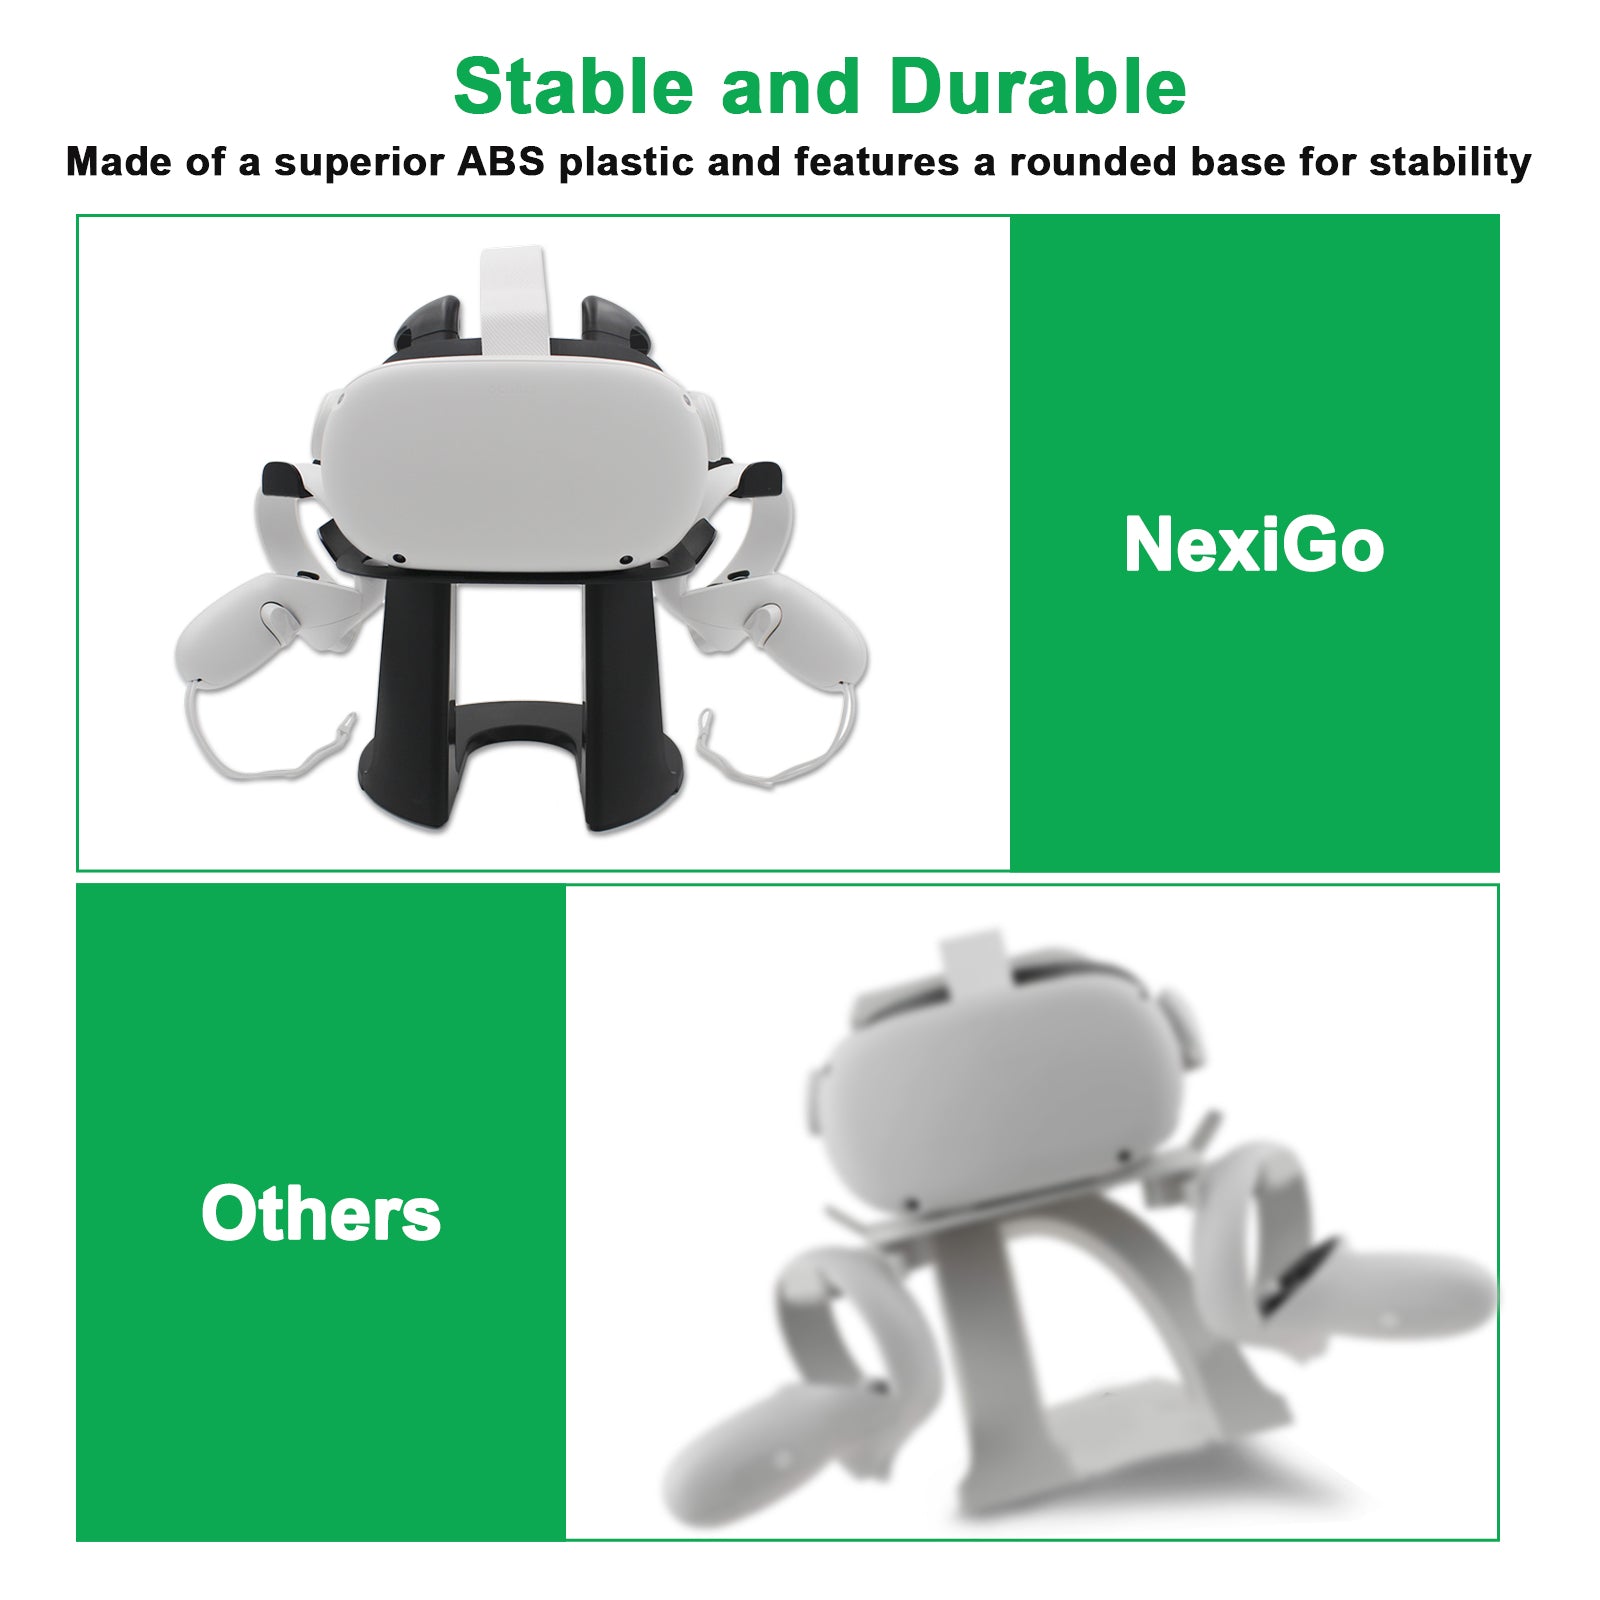 NexiGo VR stand is stable and convenient to use, made of ABS material.